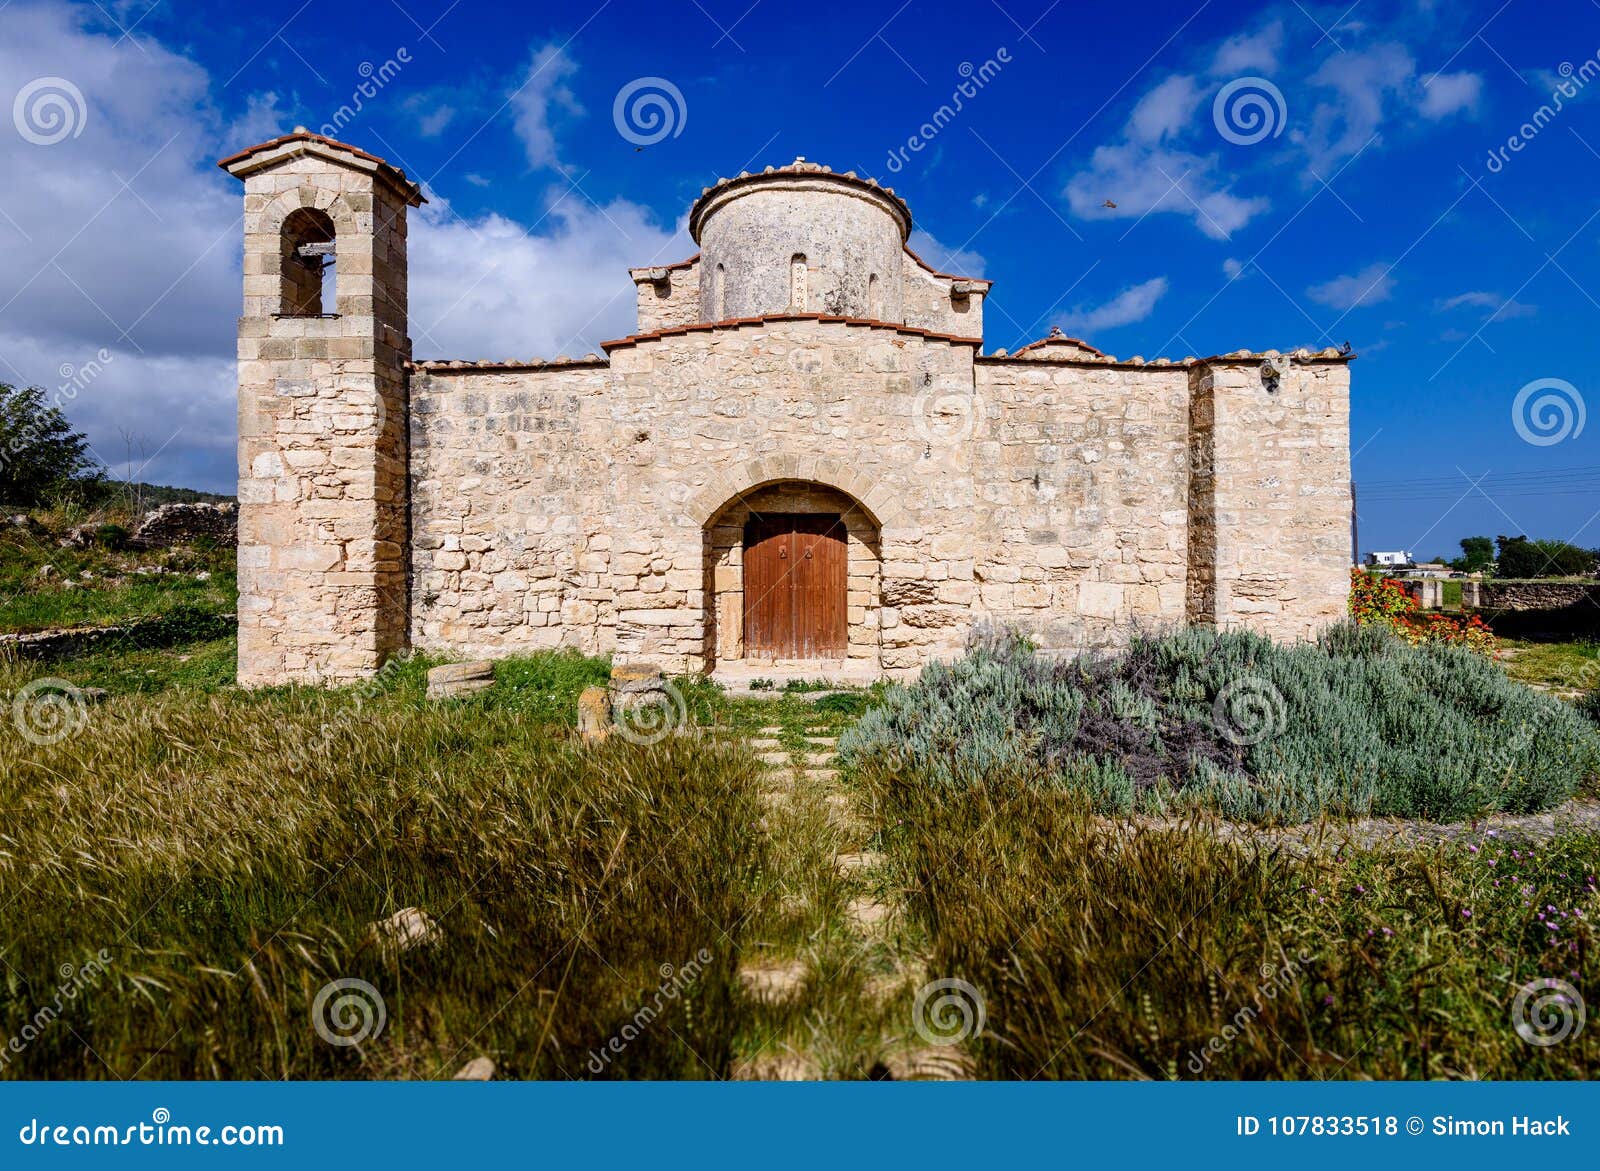 panagia kanakaria church and monastery in the turkish occupied side of cyprus 26